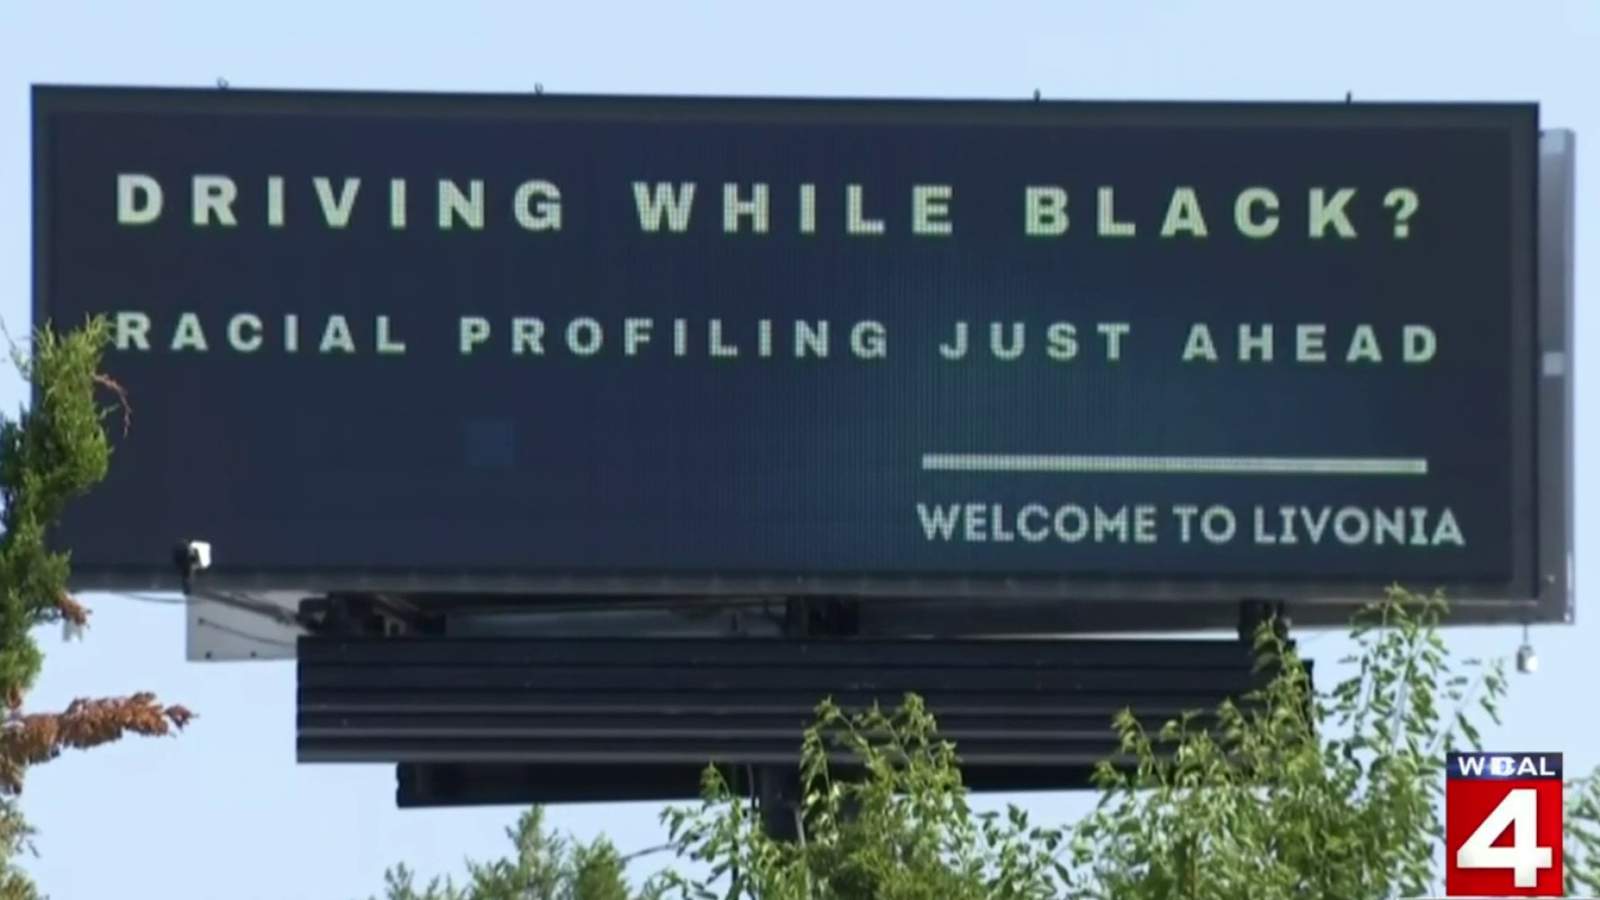 Livonia leaders dispute billboard message about racial profiling